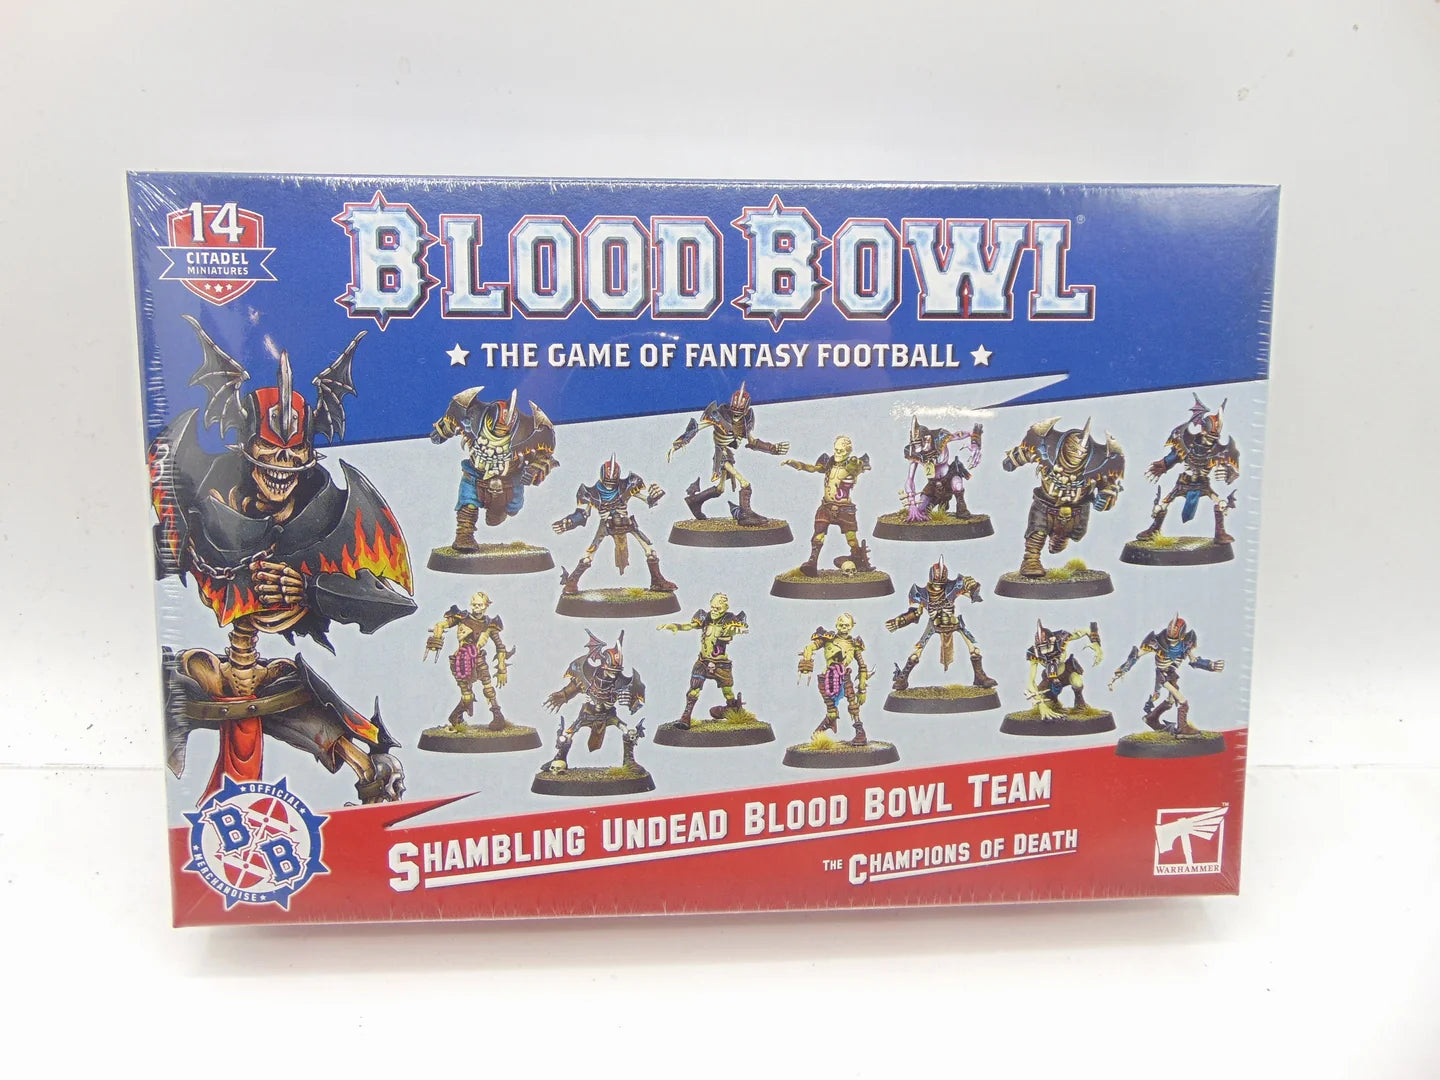 Games Workshop - Shambling Undead Blood Bowl Team: The Champions of Death